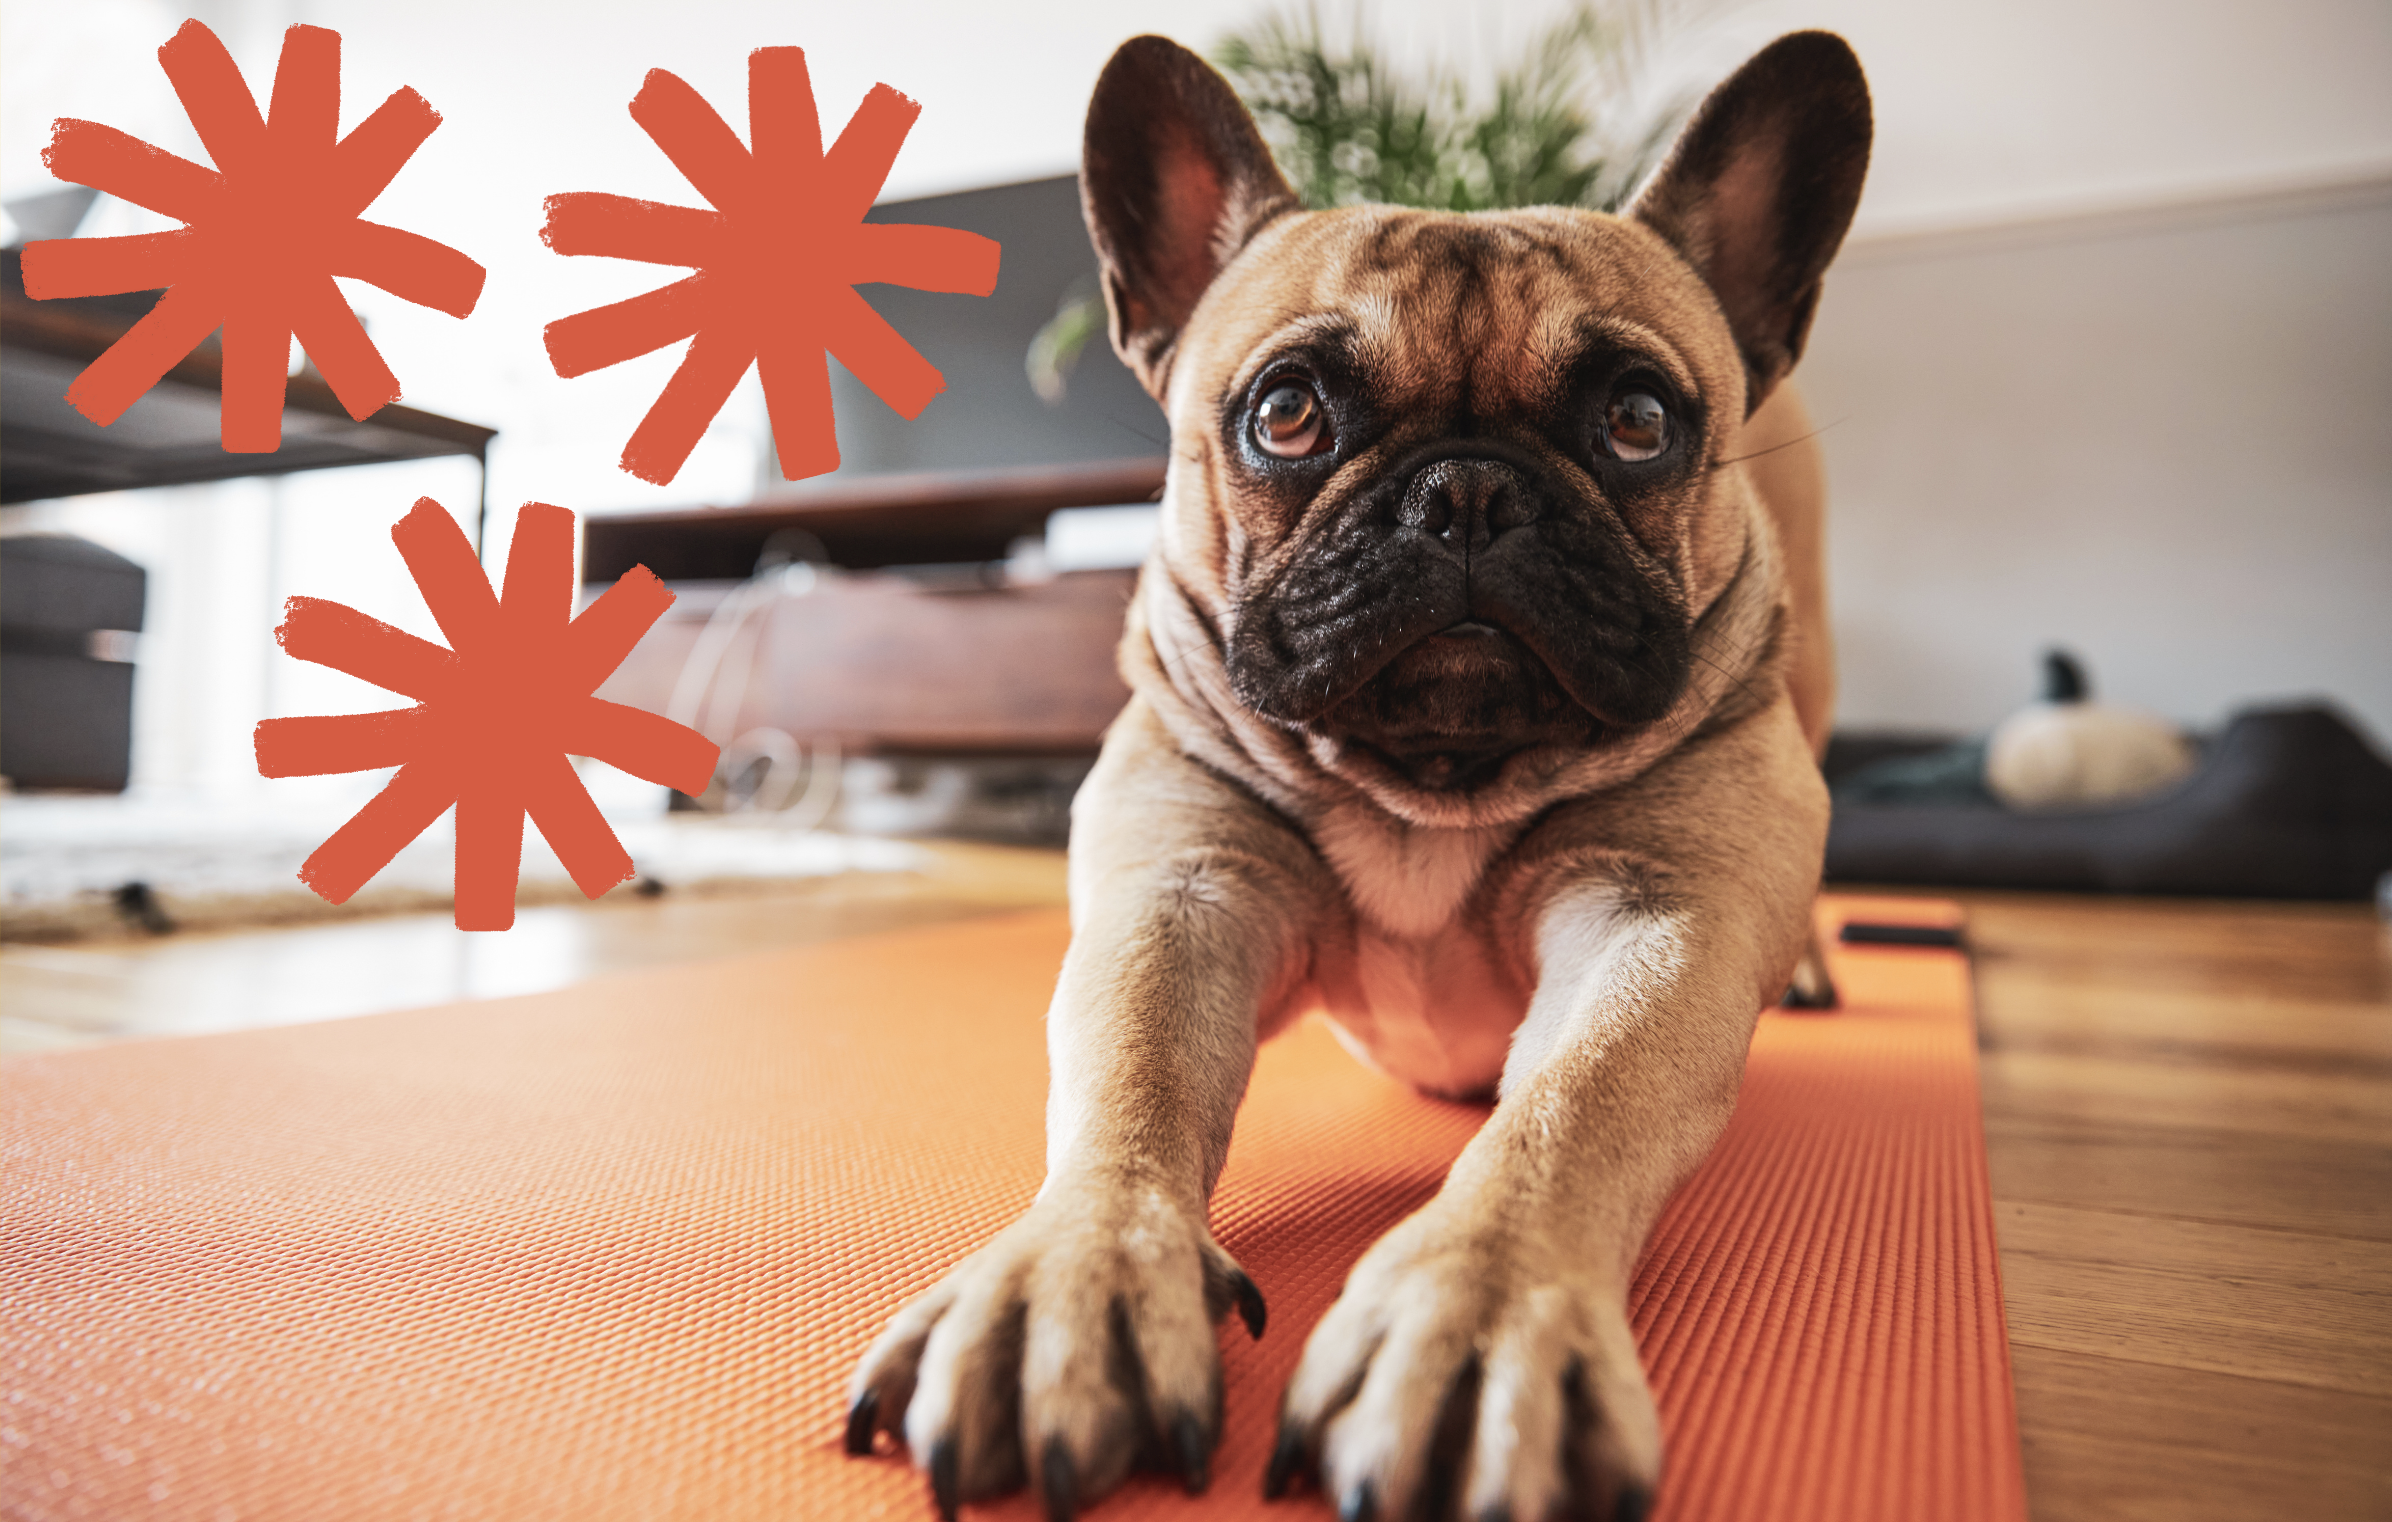 7 Unexpected Ways To Boost Your Dog's Day-To-Day Wellness